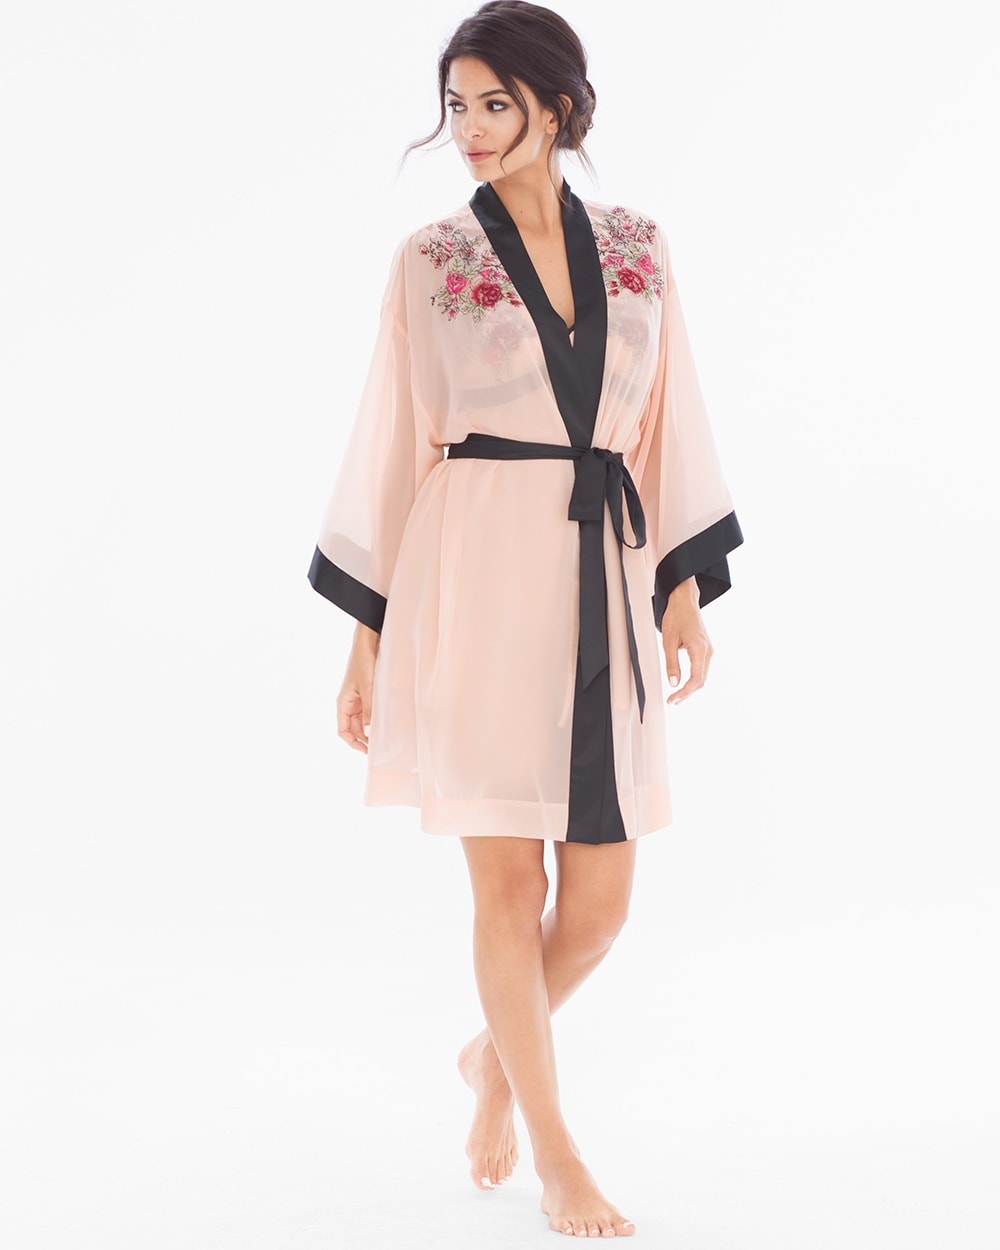 Limited Edition Lace Affaire Short Robe Rose Blush